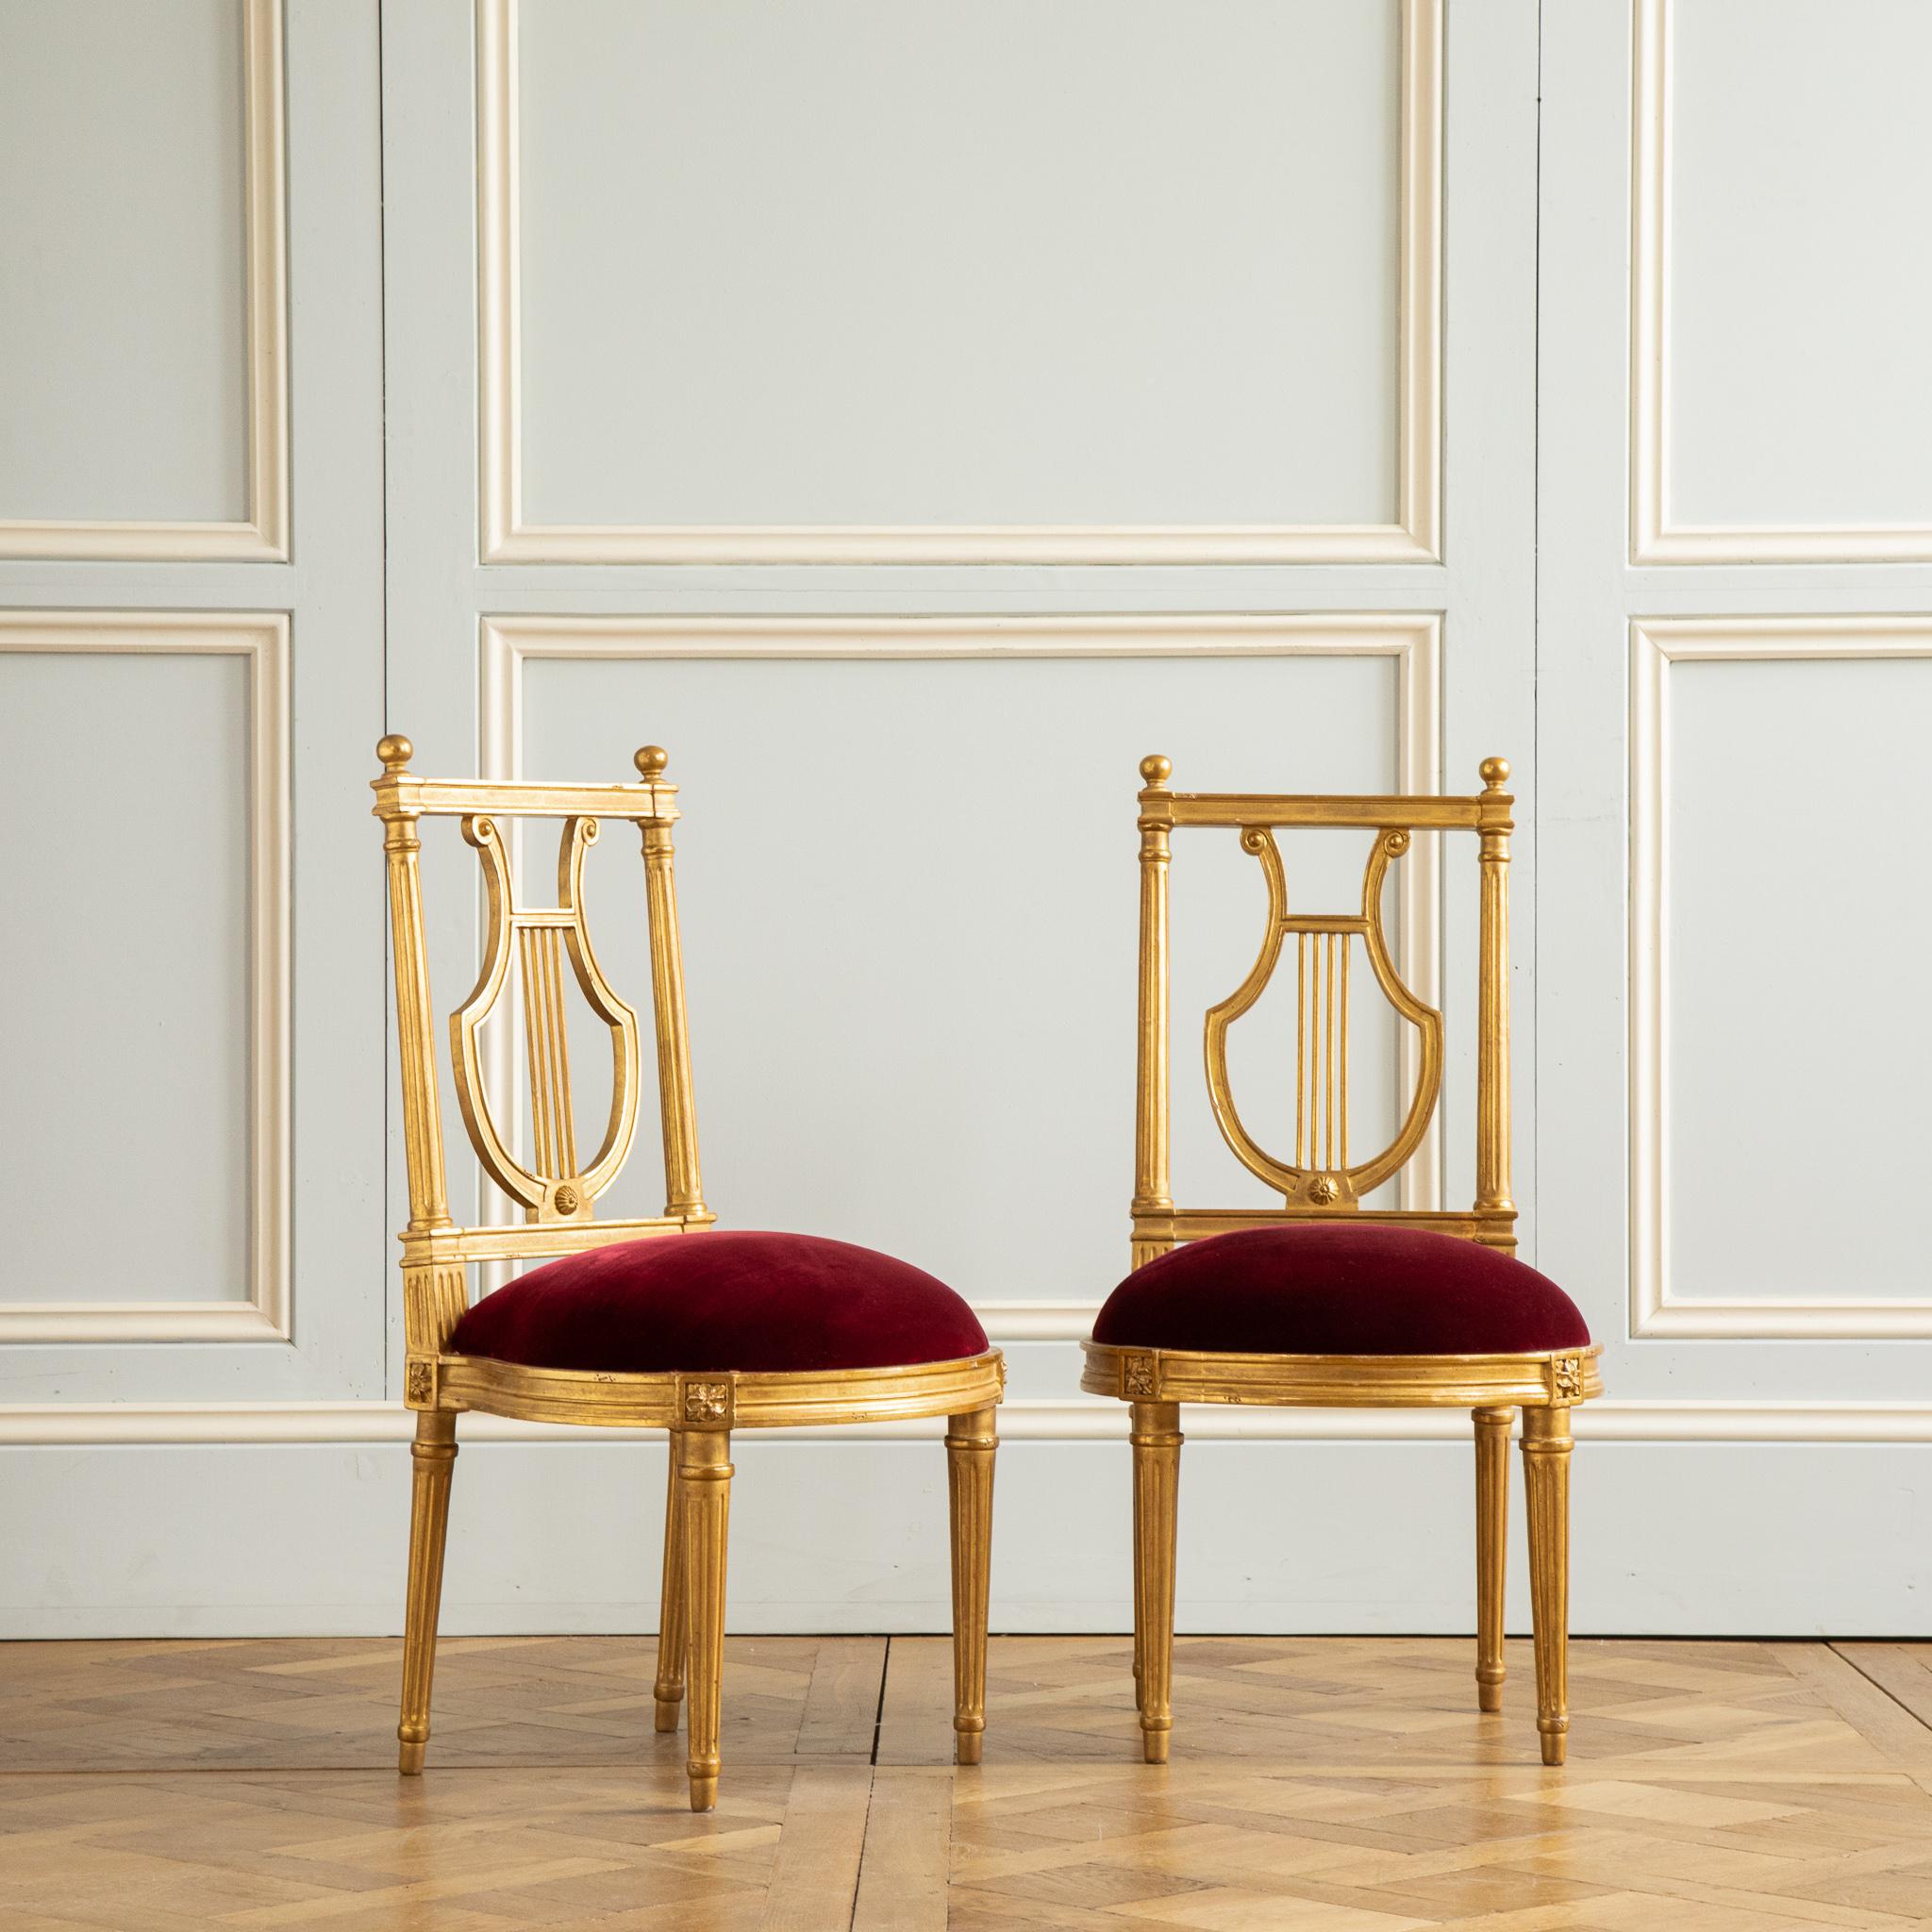 a Pair of Giltwood Louis XVI style chairs with Lyre back .
Models inspired by george Jacob who was one of the best Master in the 18th century Paris
He produced carved, painted and gilded seat furniture and upholstery work for the French royal